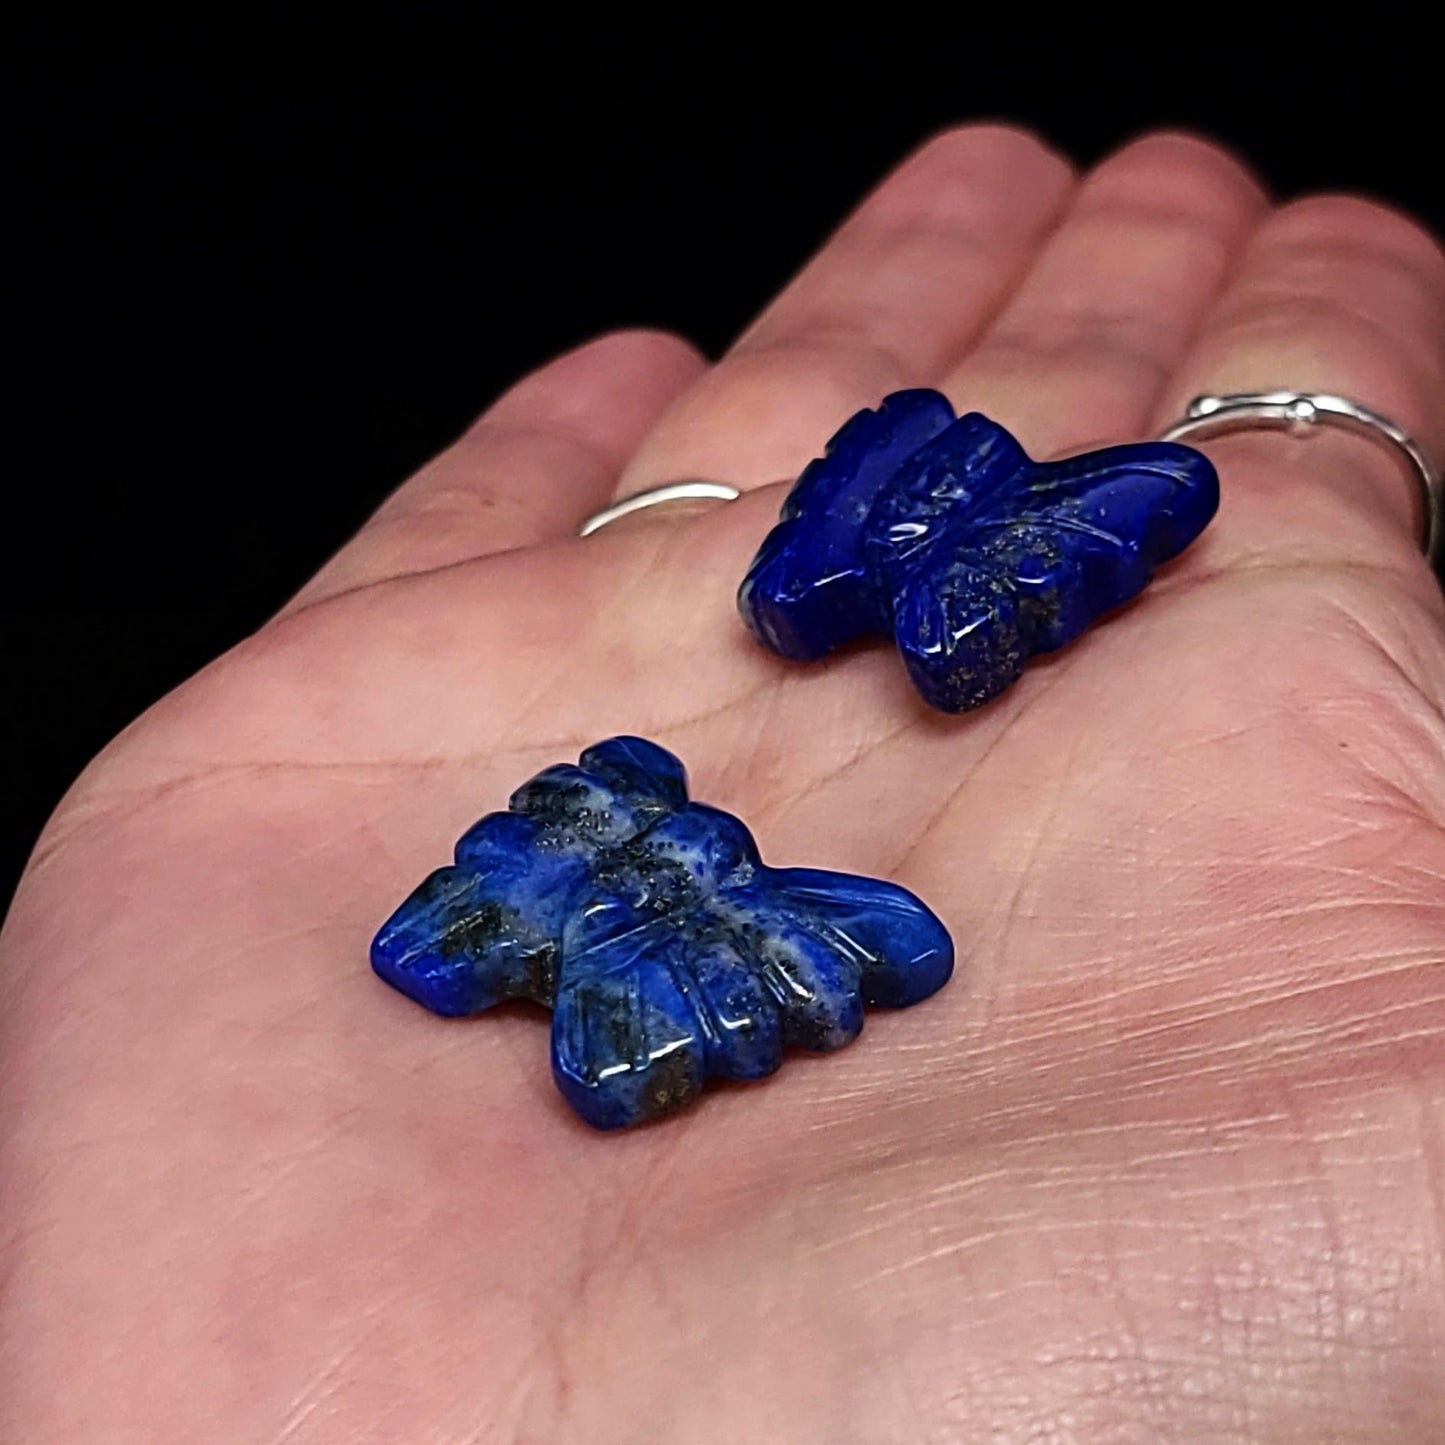 Lapis Lazuli Butterfly Stone 25mm 1" - Elevated Metaphysical